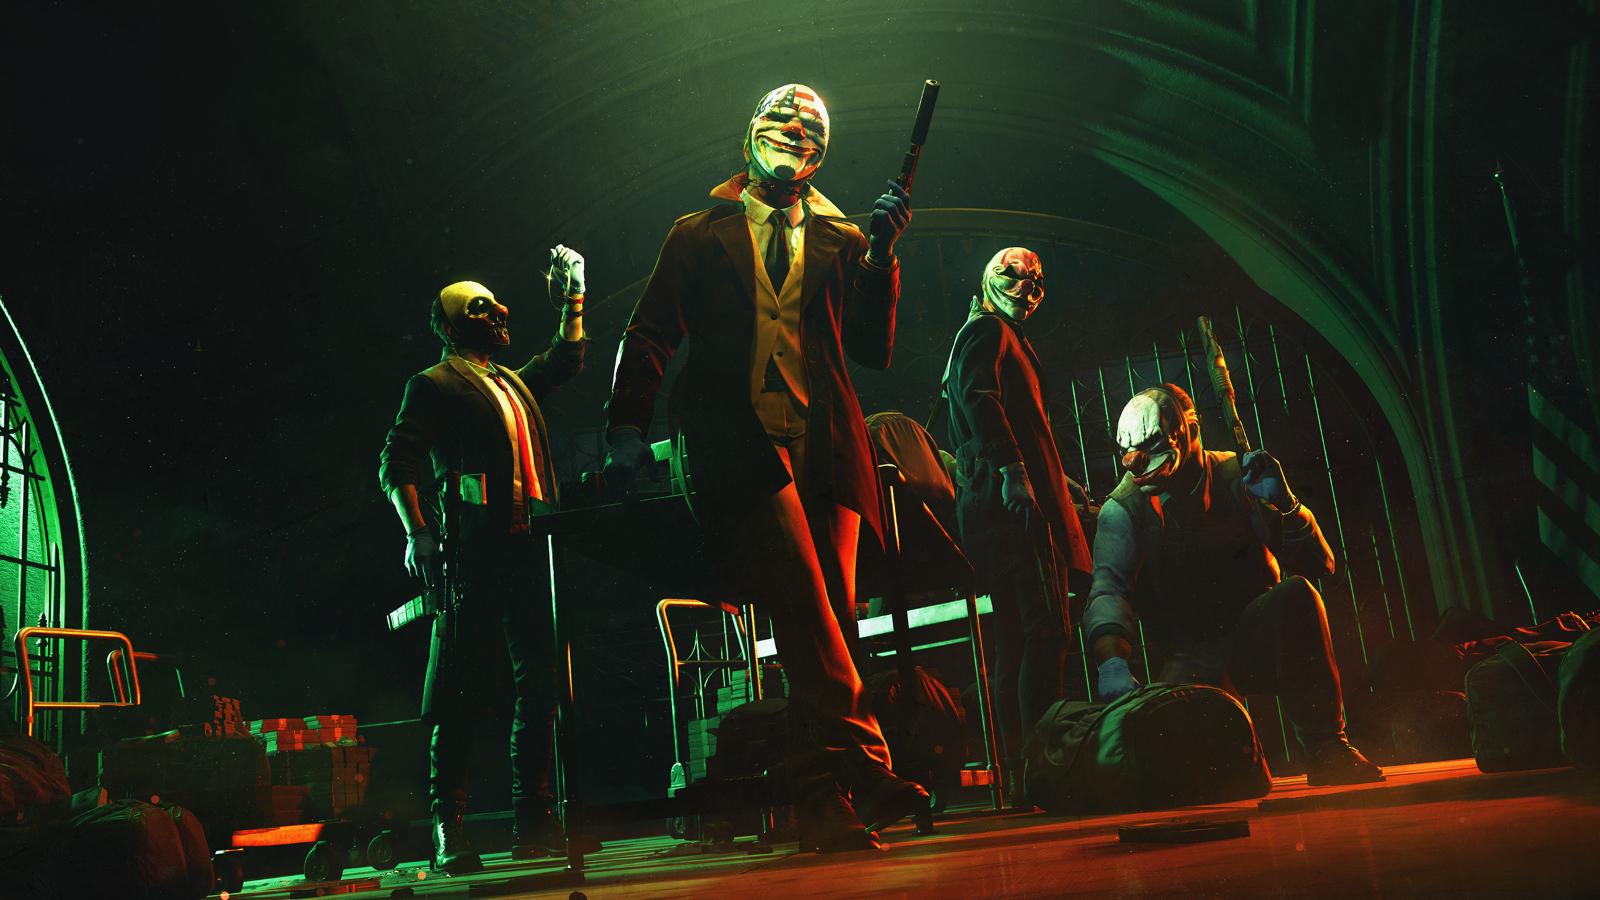 Payday 3 key art featuring four of the main characters